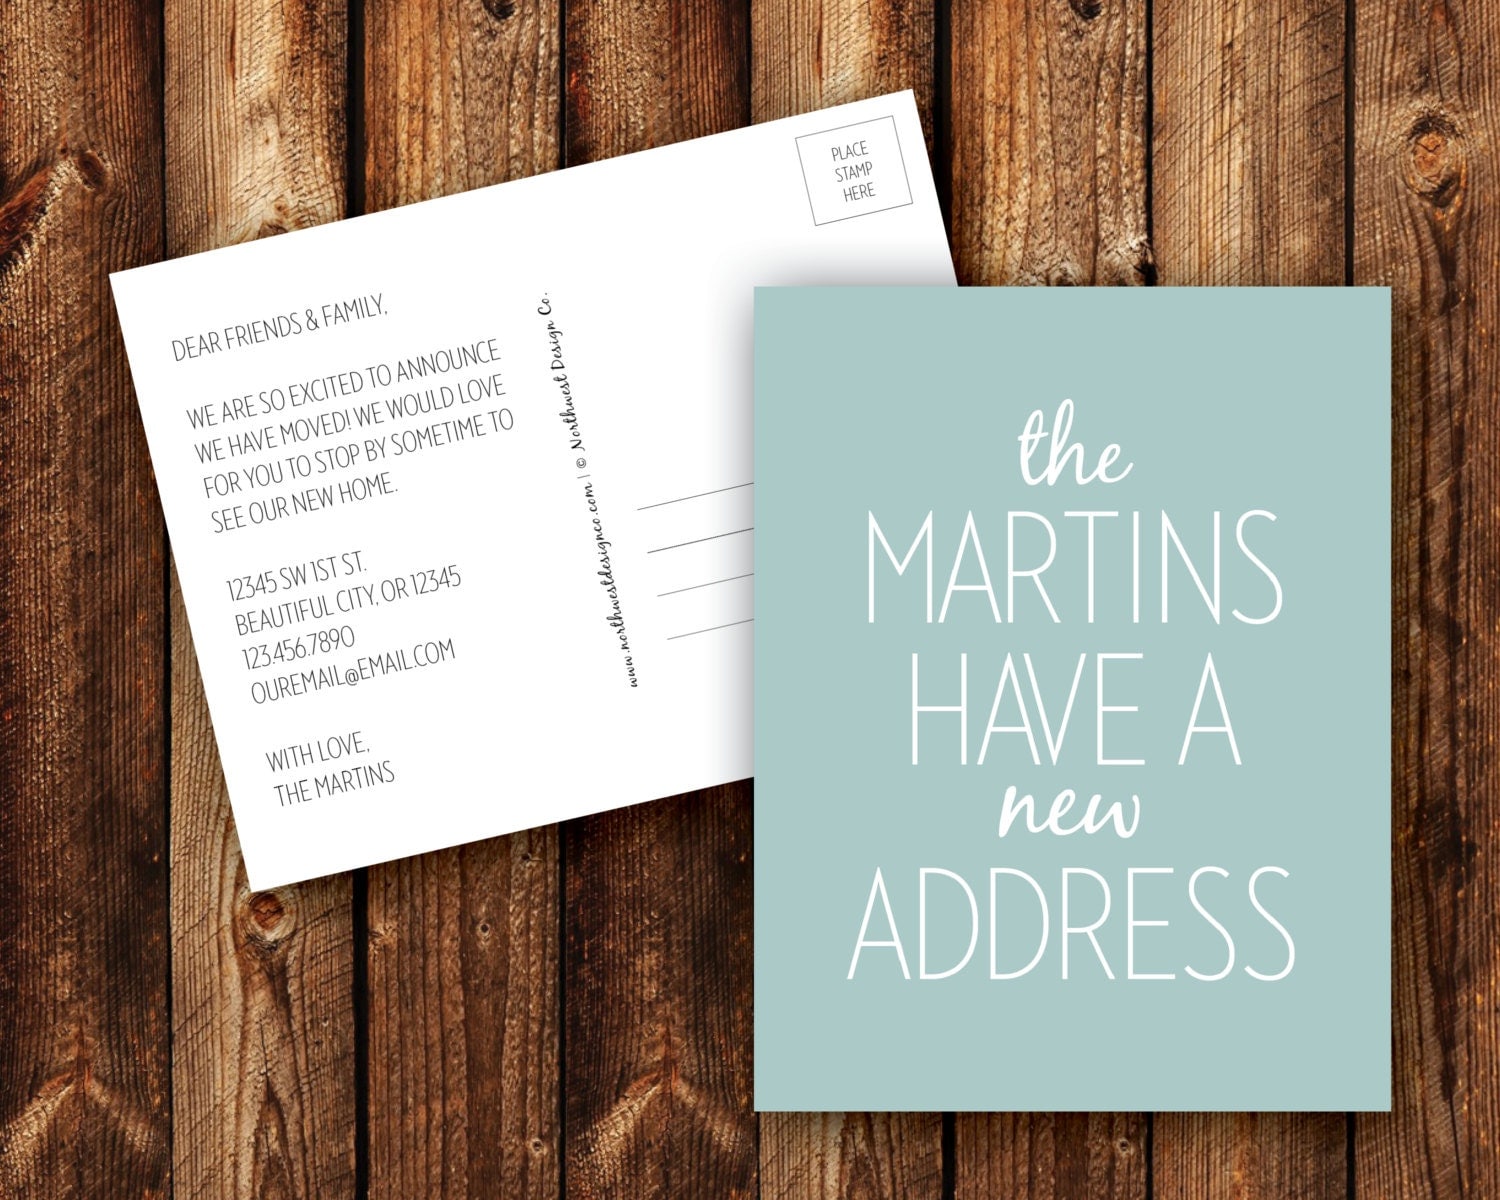 We Have a New Address Announcement Postcard Blue Gray Black